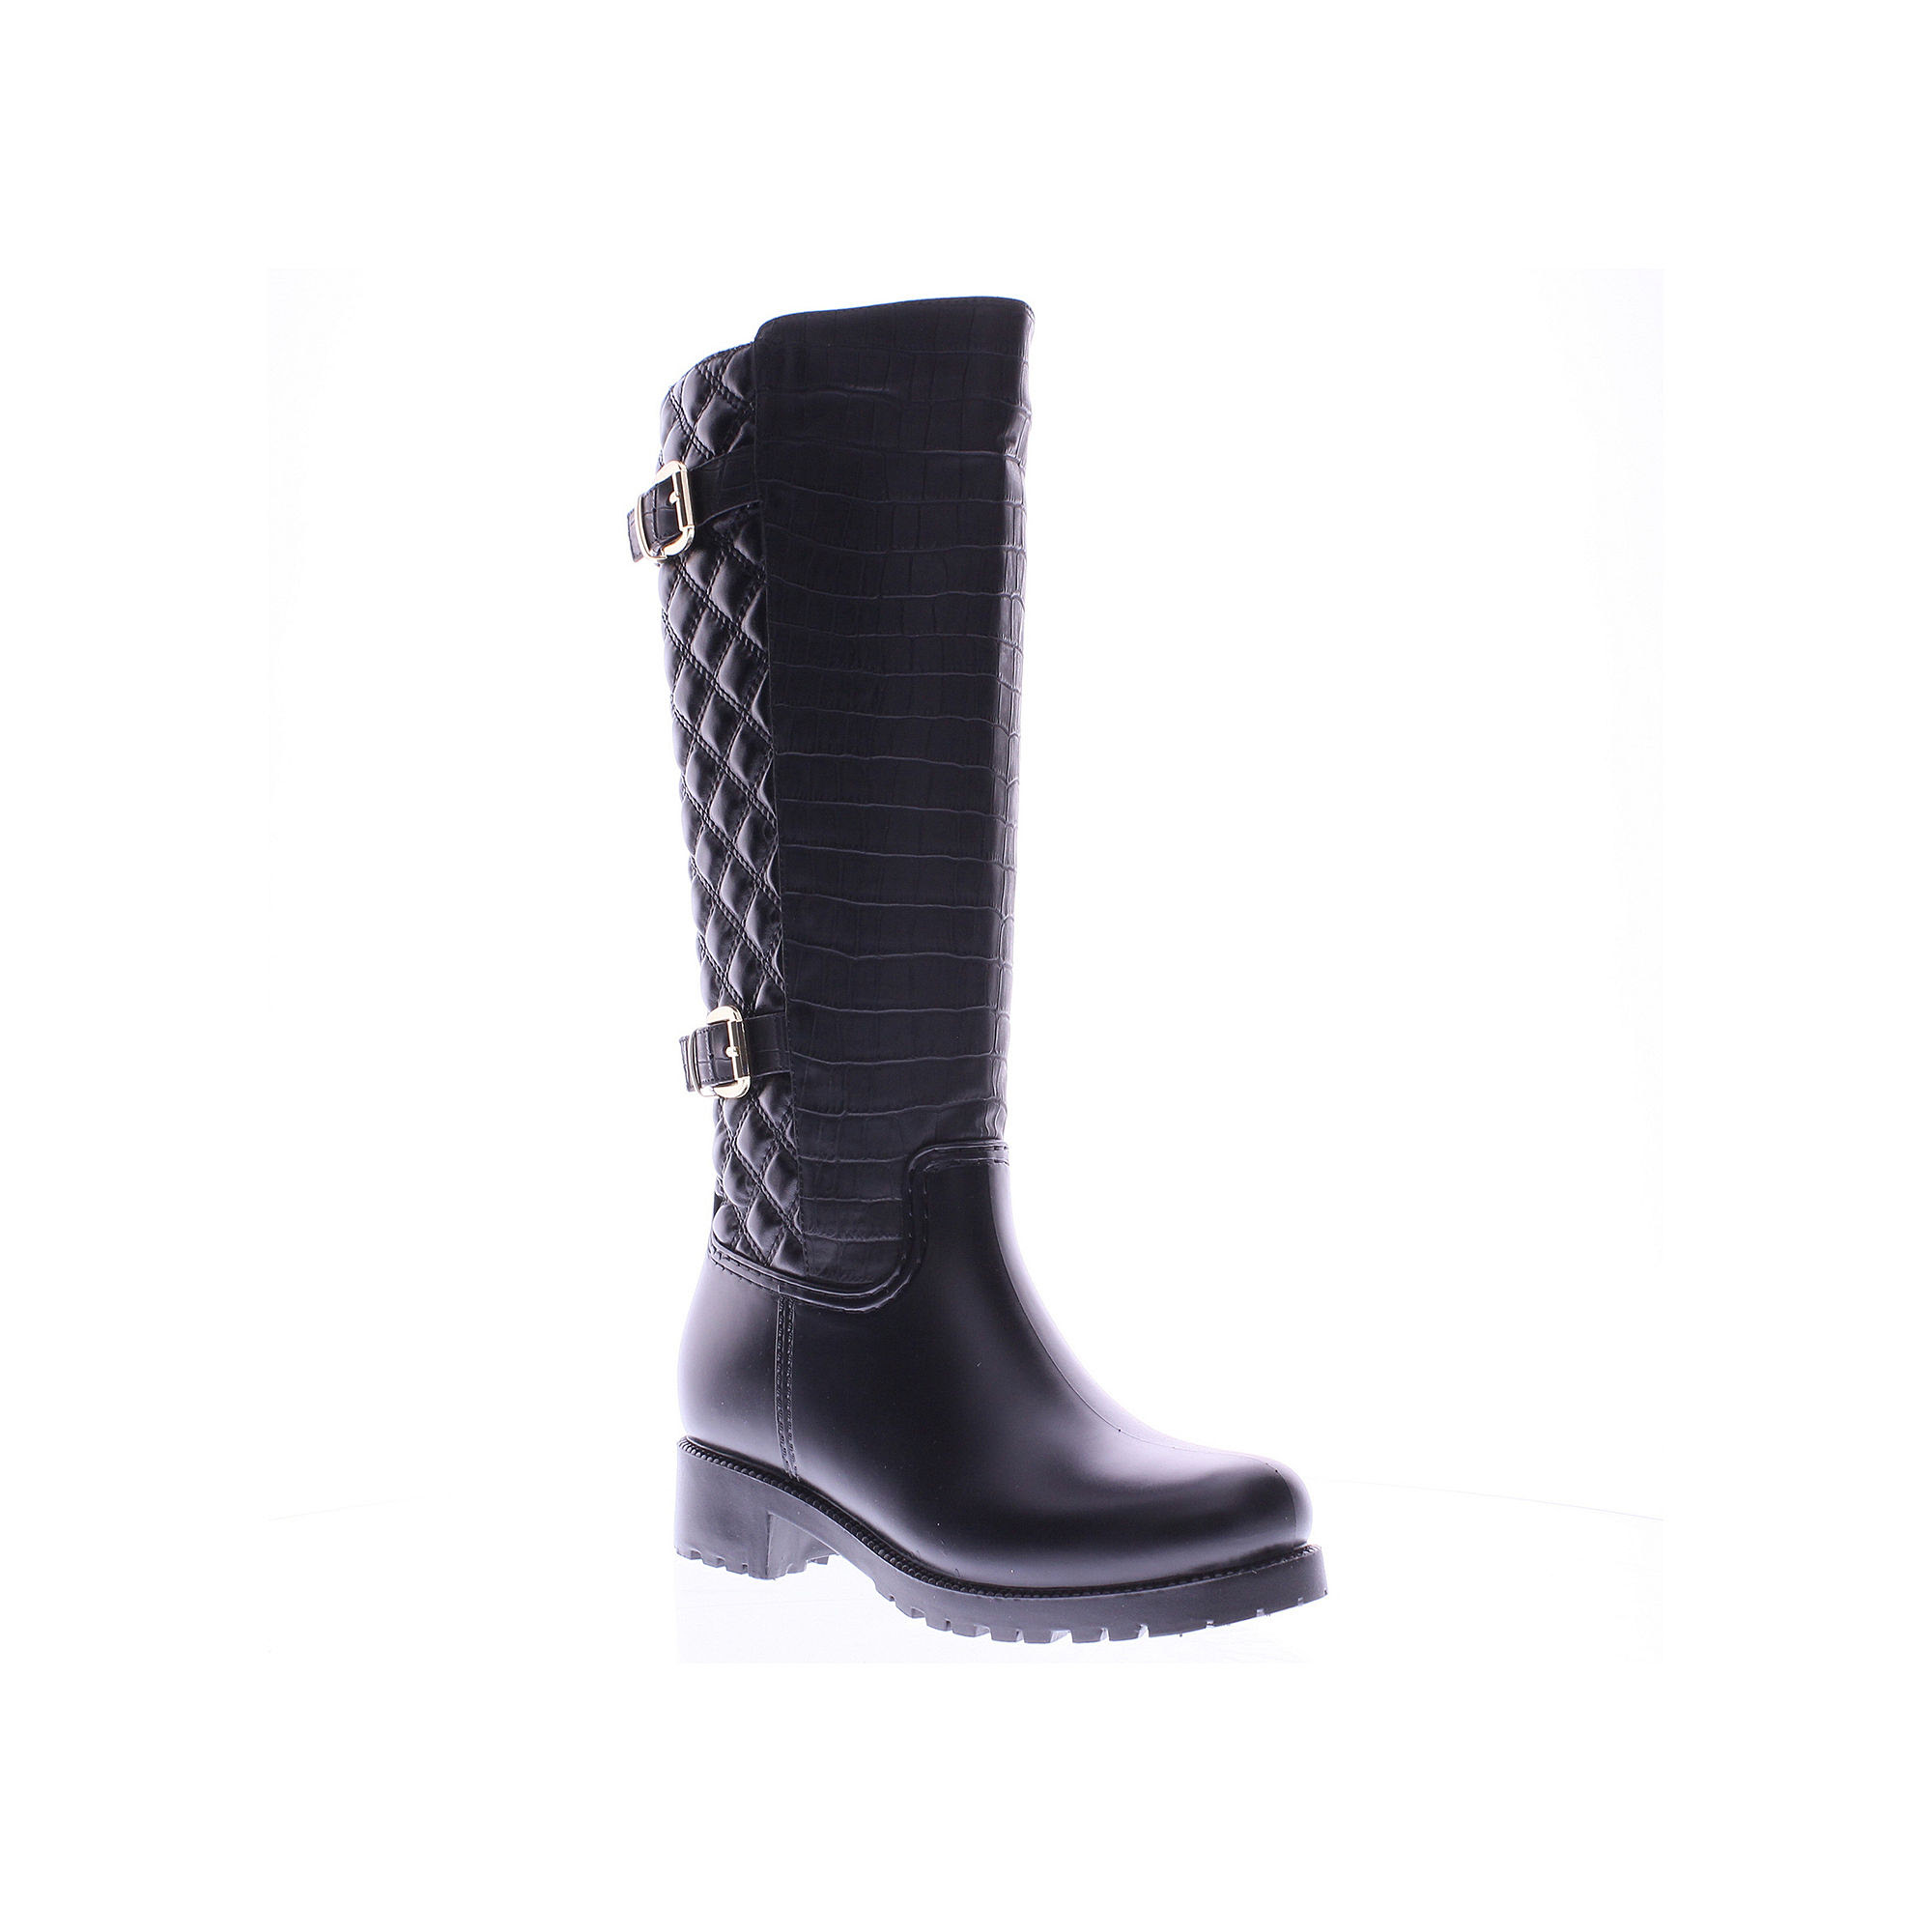 Cheap Offer Spring Step Sauna Tall Rain Boots Before Too Late